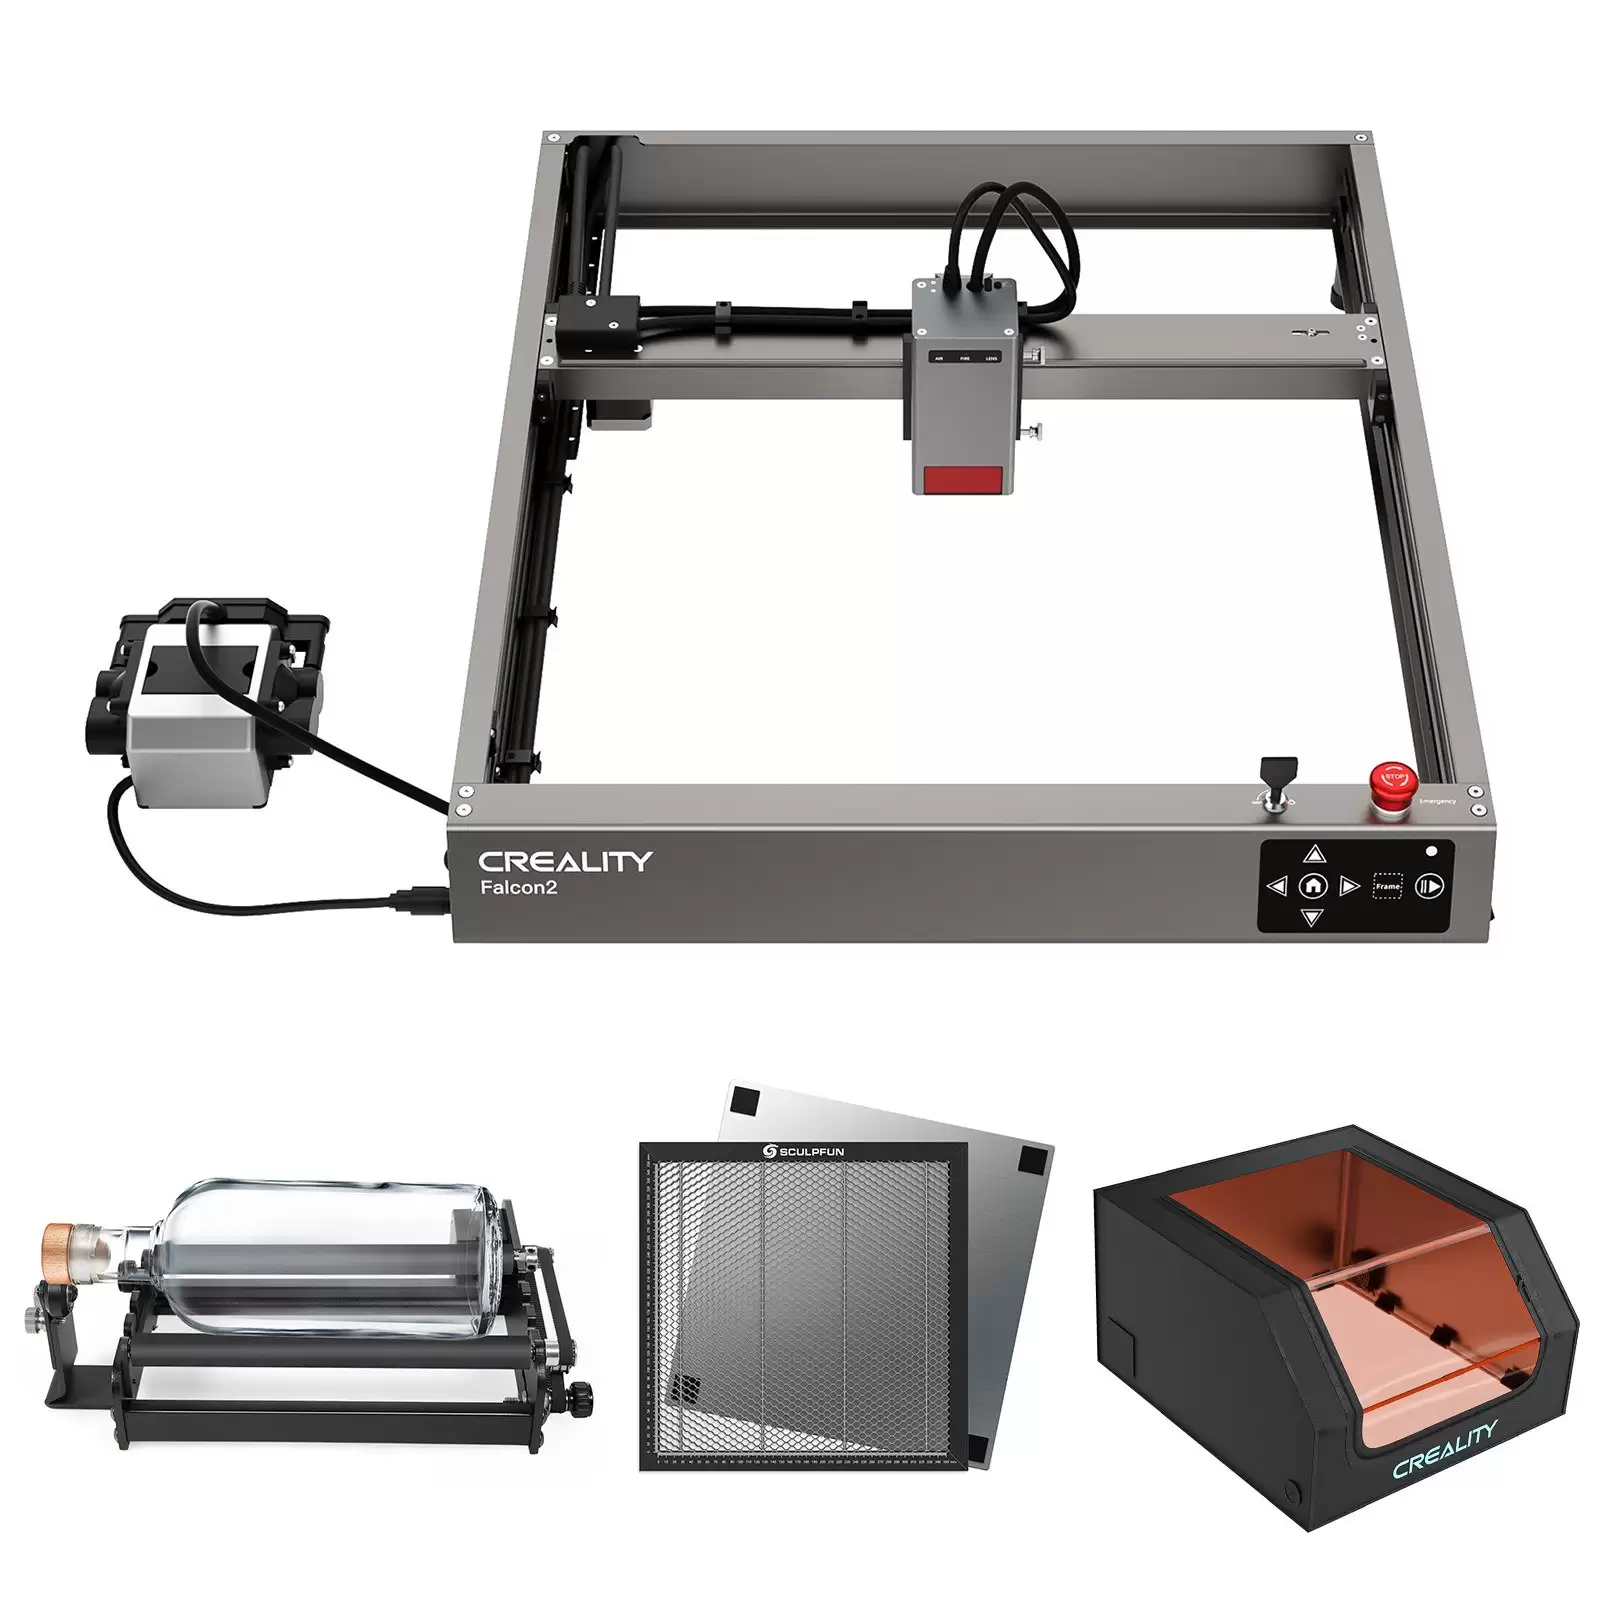 Pay Only $ 739 Creality Falcon2 22w Laser Engraver With Y-Axis Rotary Roller And 700x720x400mm Protective Box And 400x400mm Honeycomb Working Table Board ,Free Shipping With This Cafago Discount Voucher